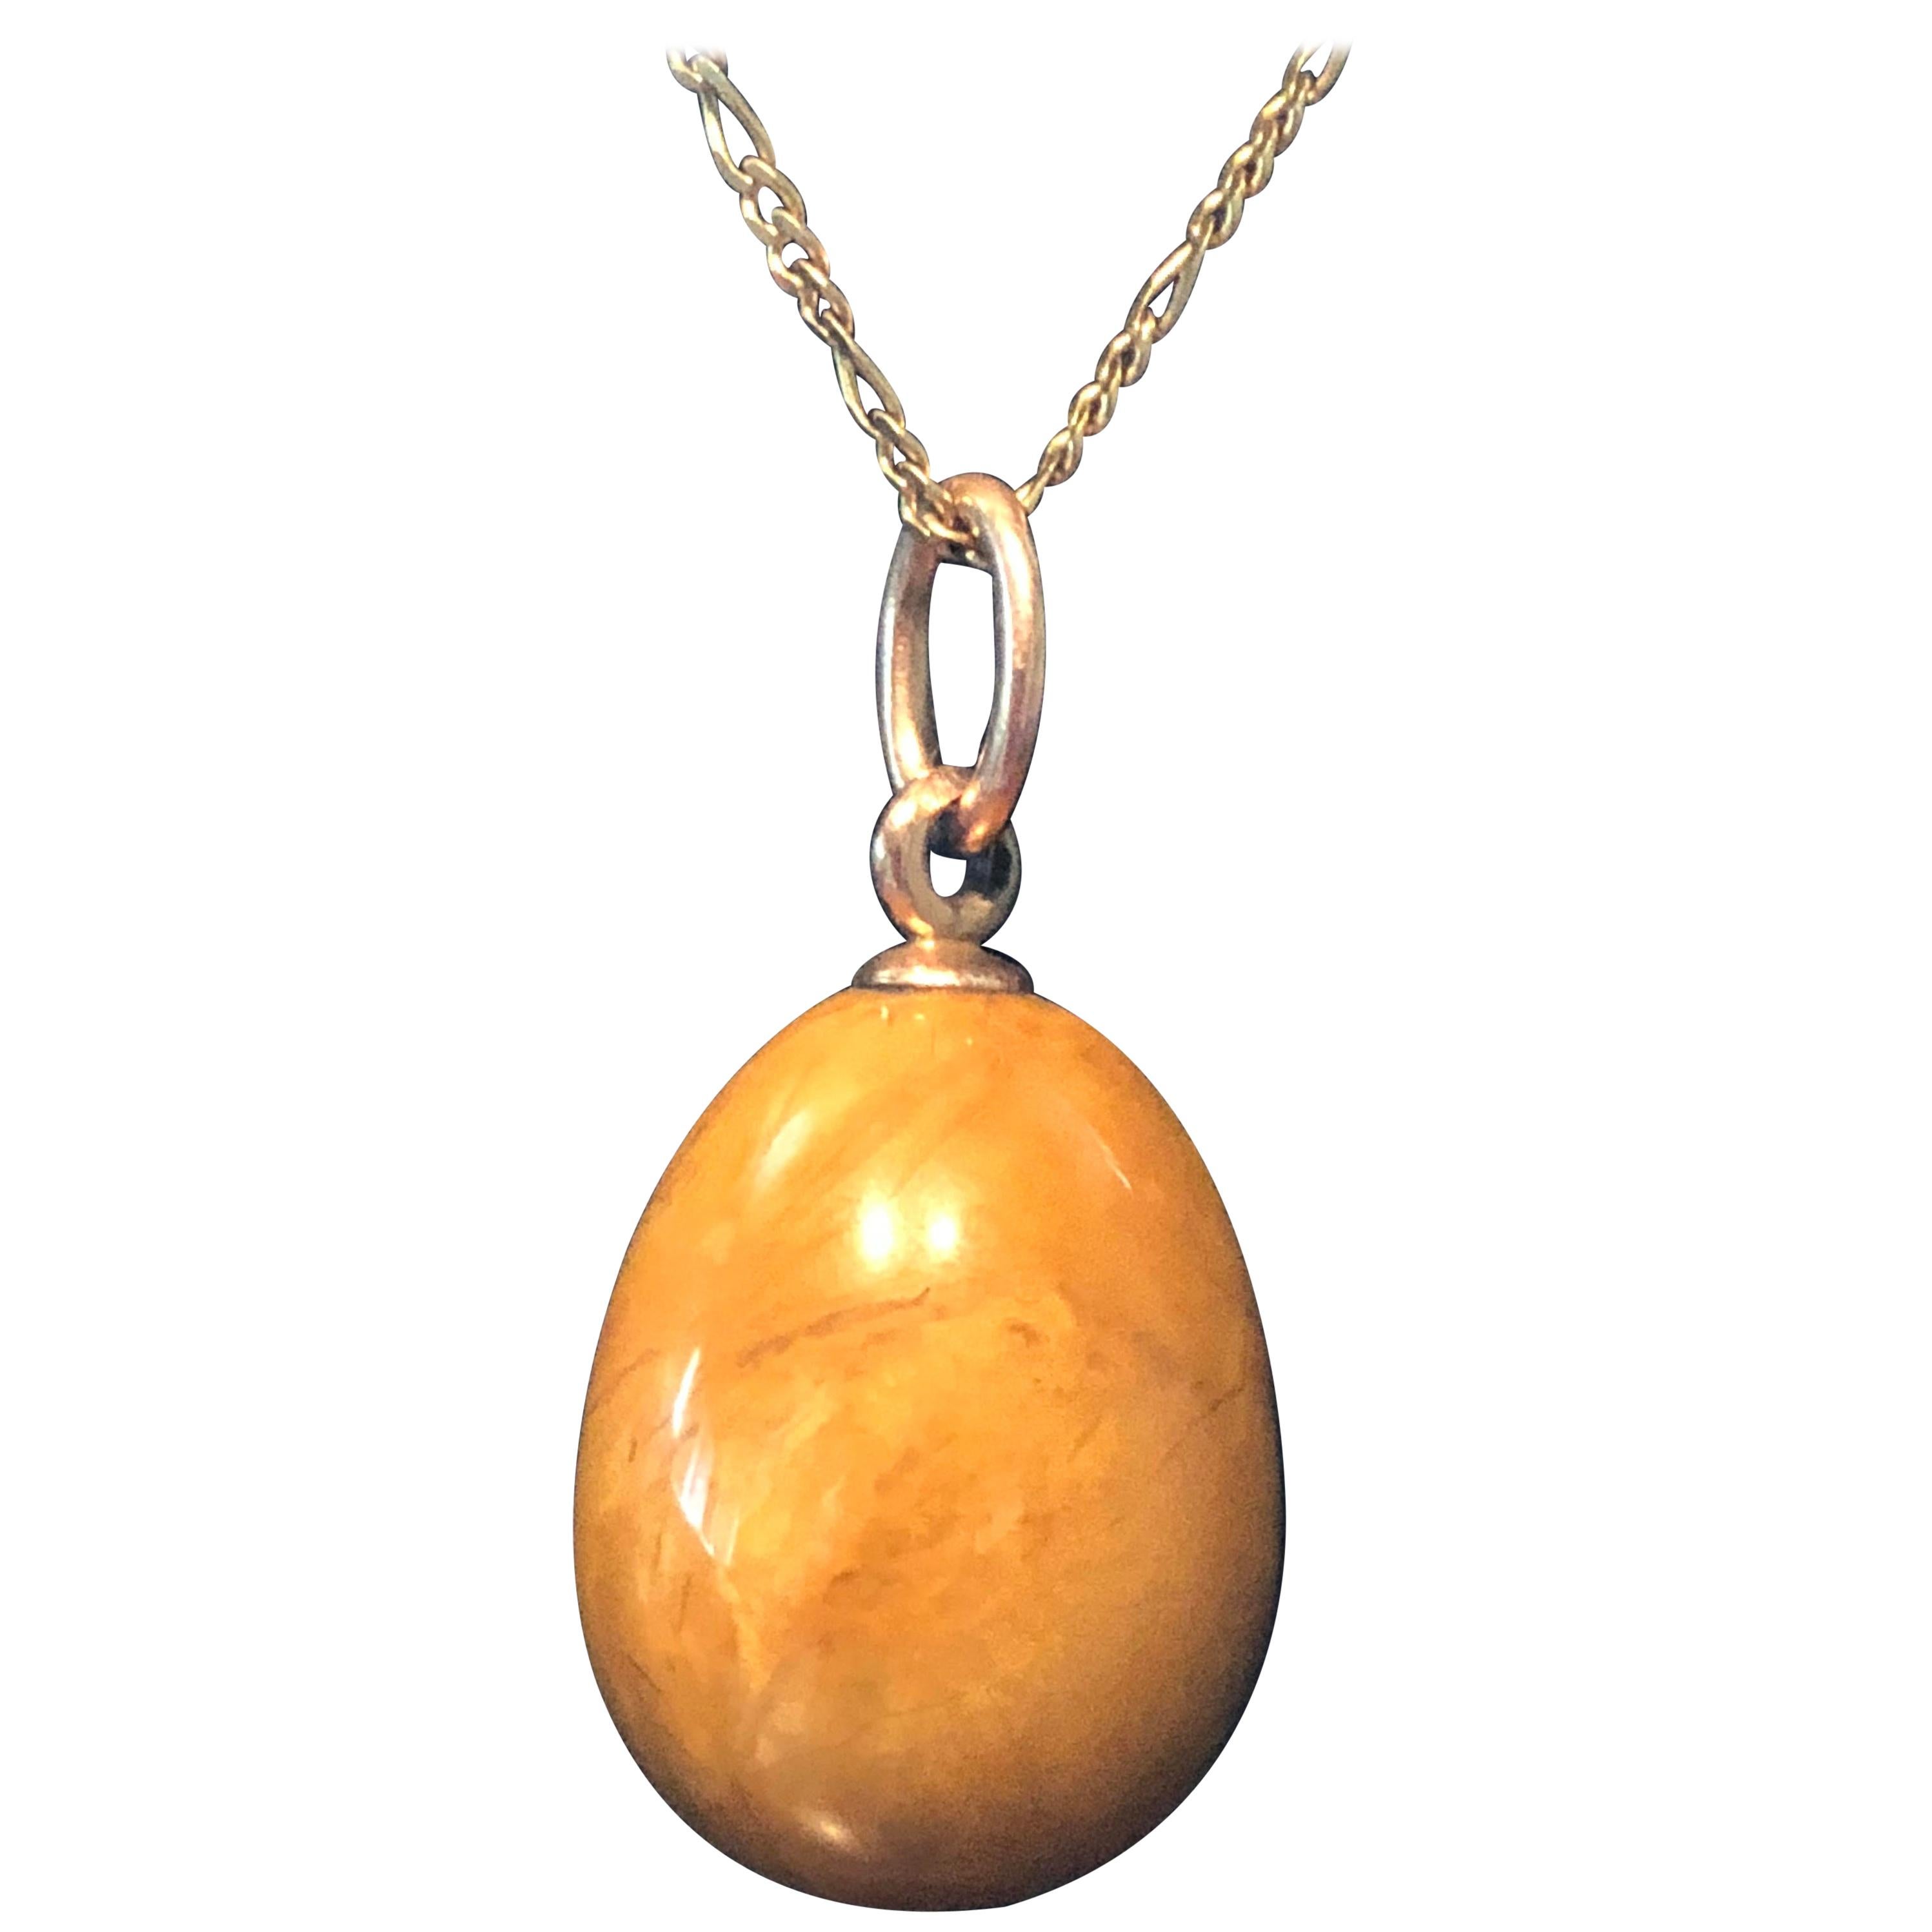 Antique Imperial Russian Faberge 14 Karat Agate Egg Pendent For Sale